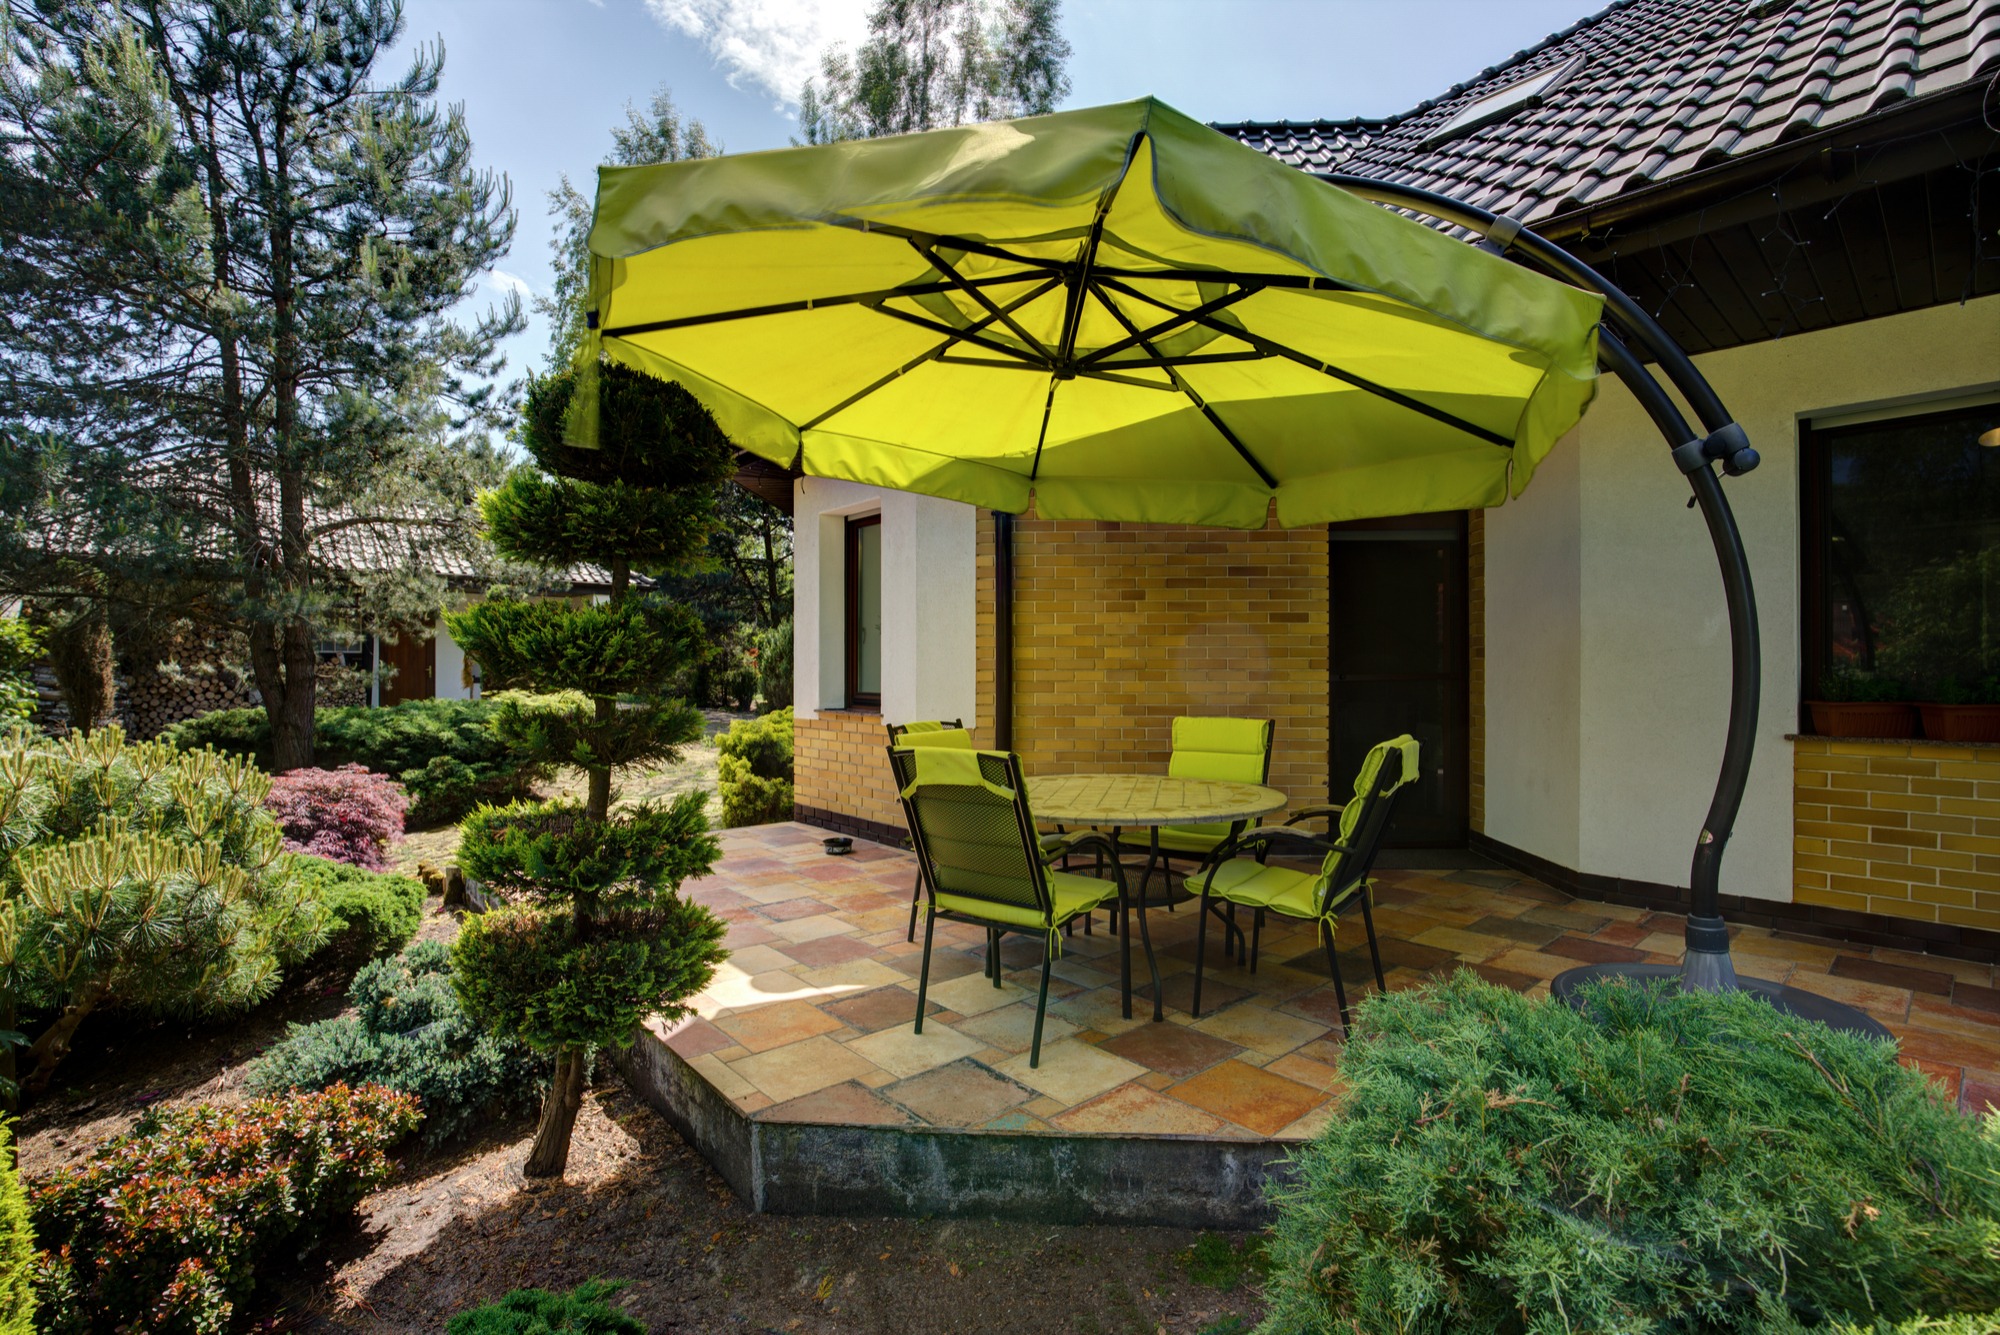 How To Create Shade In A Backyard, How To Create Shade On Your Patio